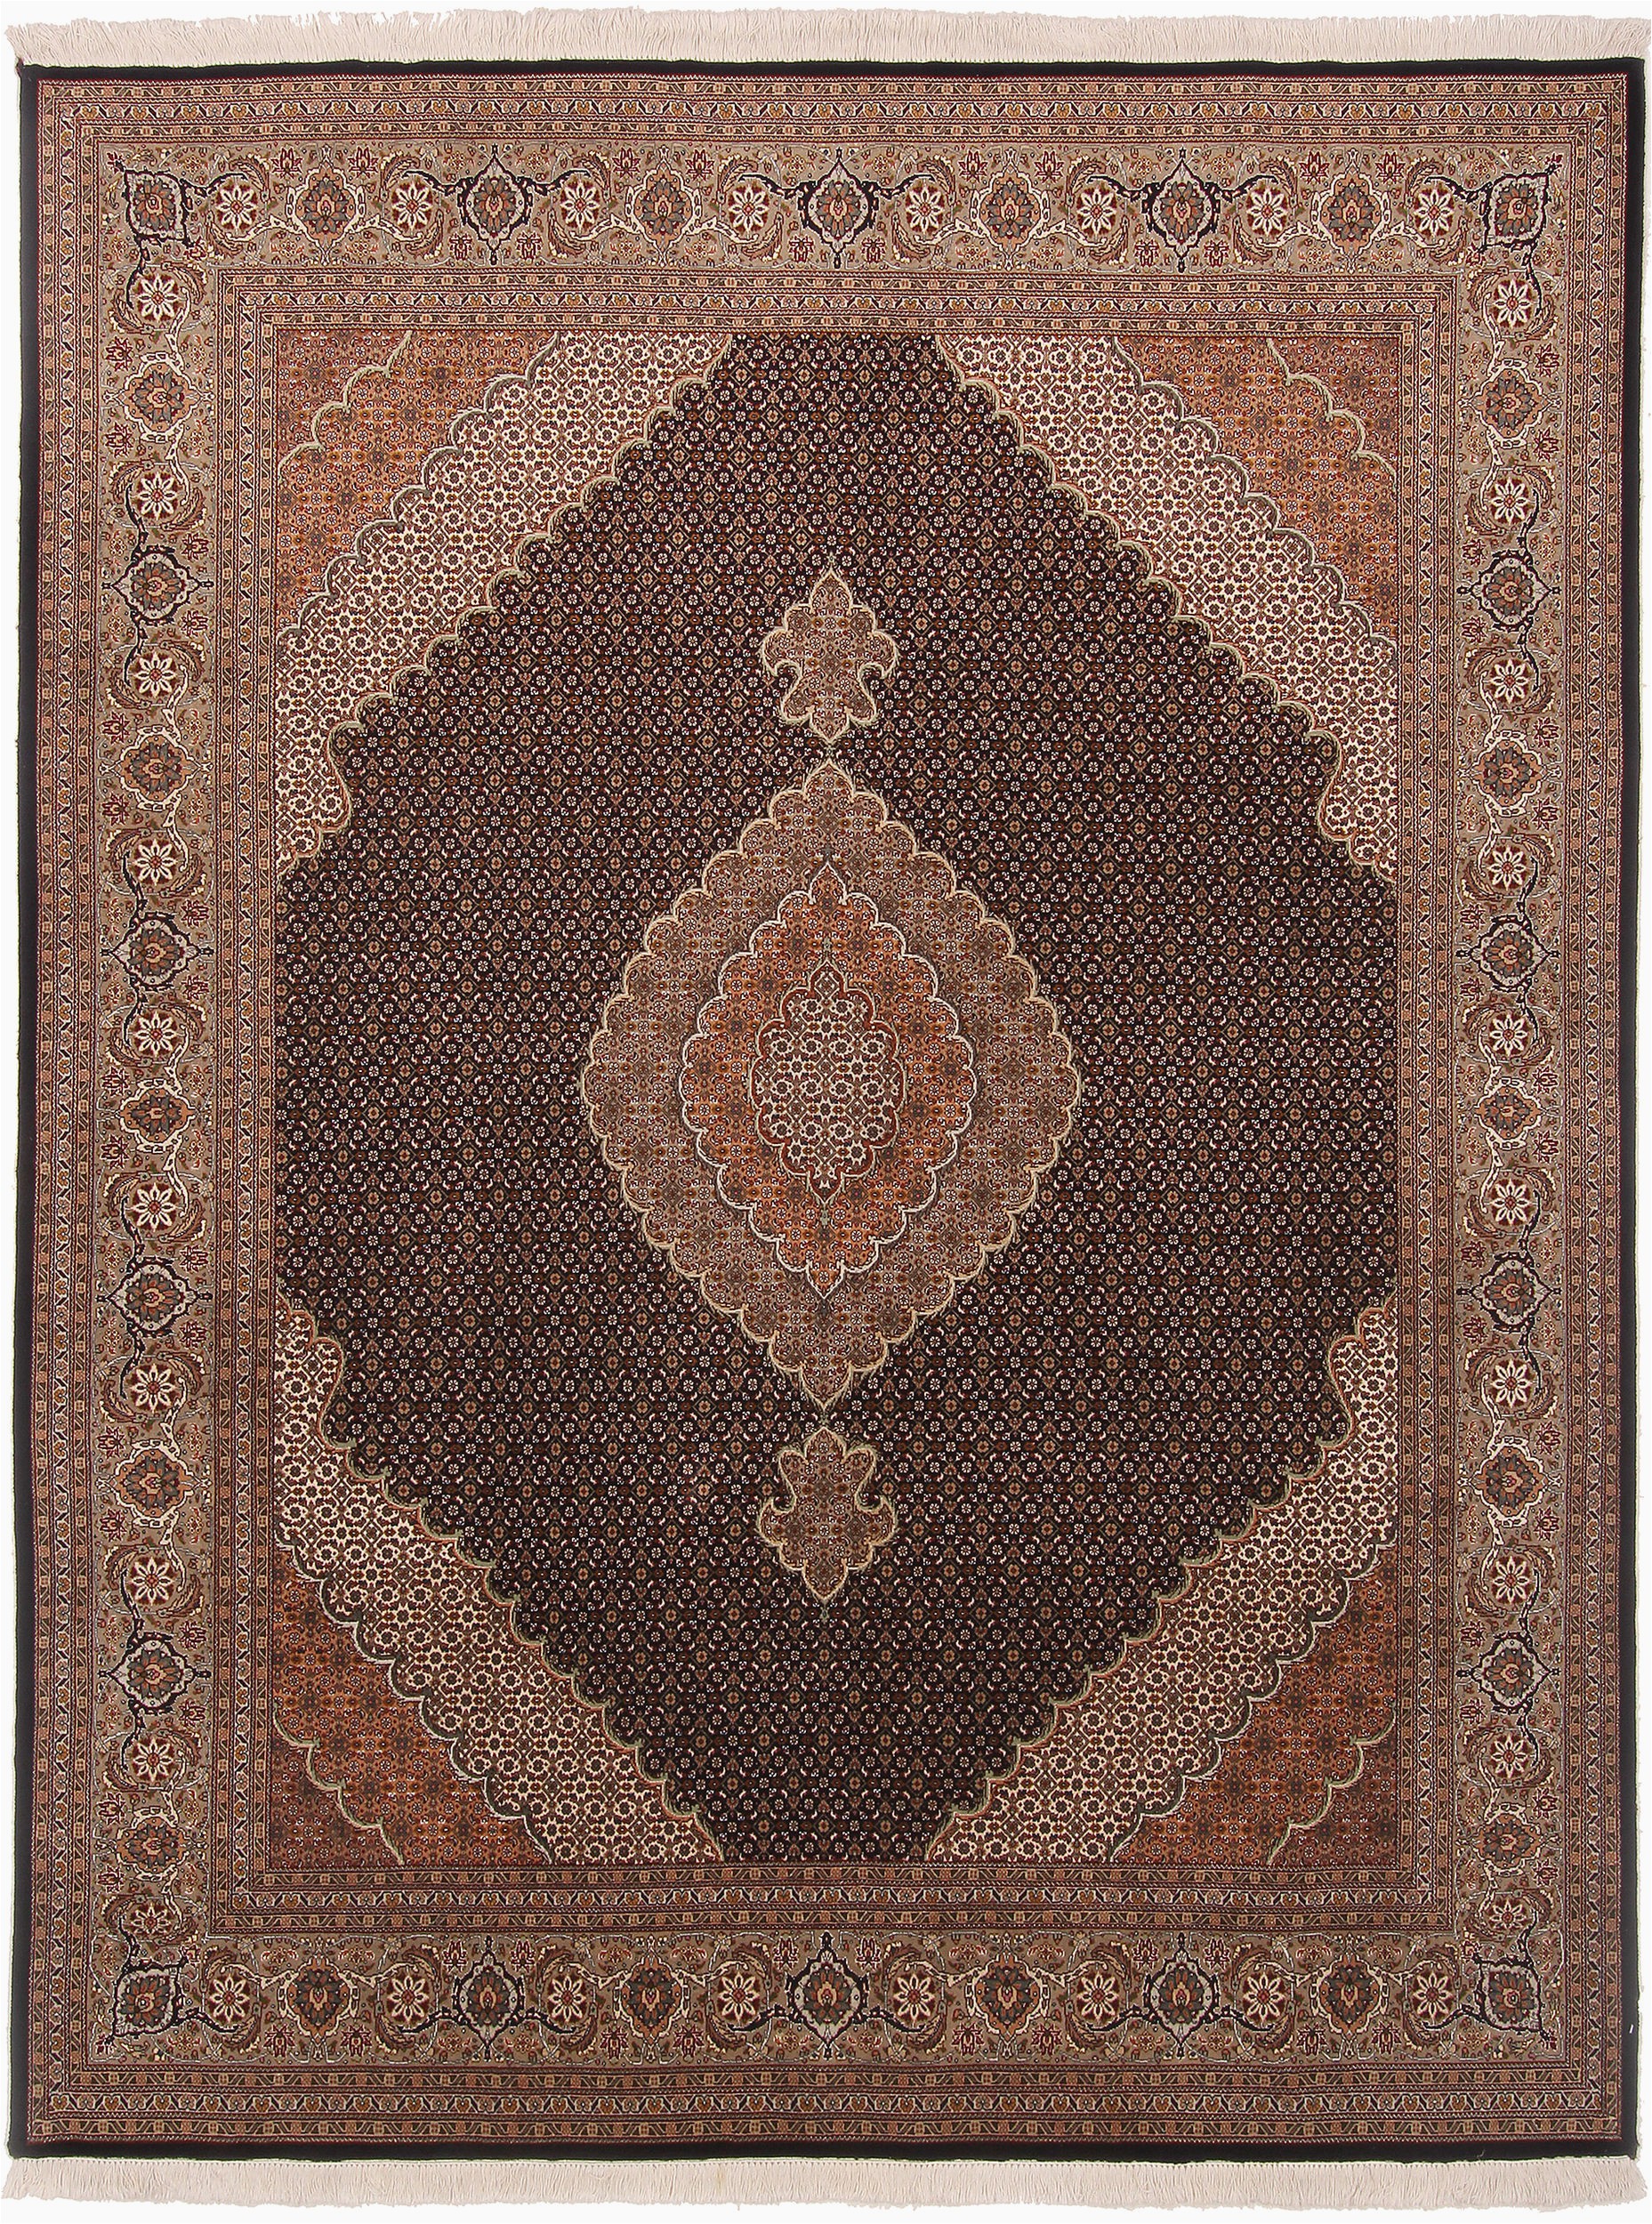 8 Ft X 8 Ft Square area Rug Mahi Beige Square Hand Knotted 6 7" X 8 6" area Rug 254